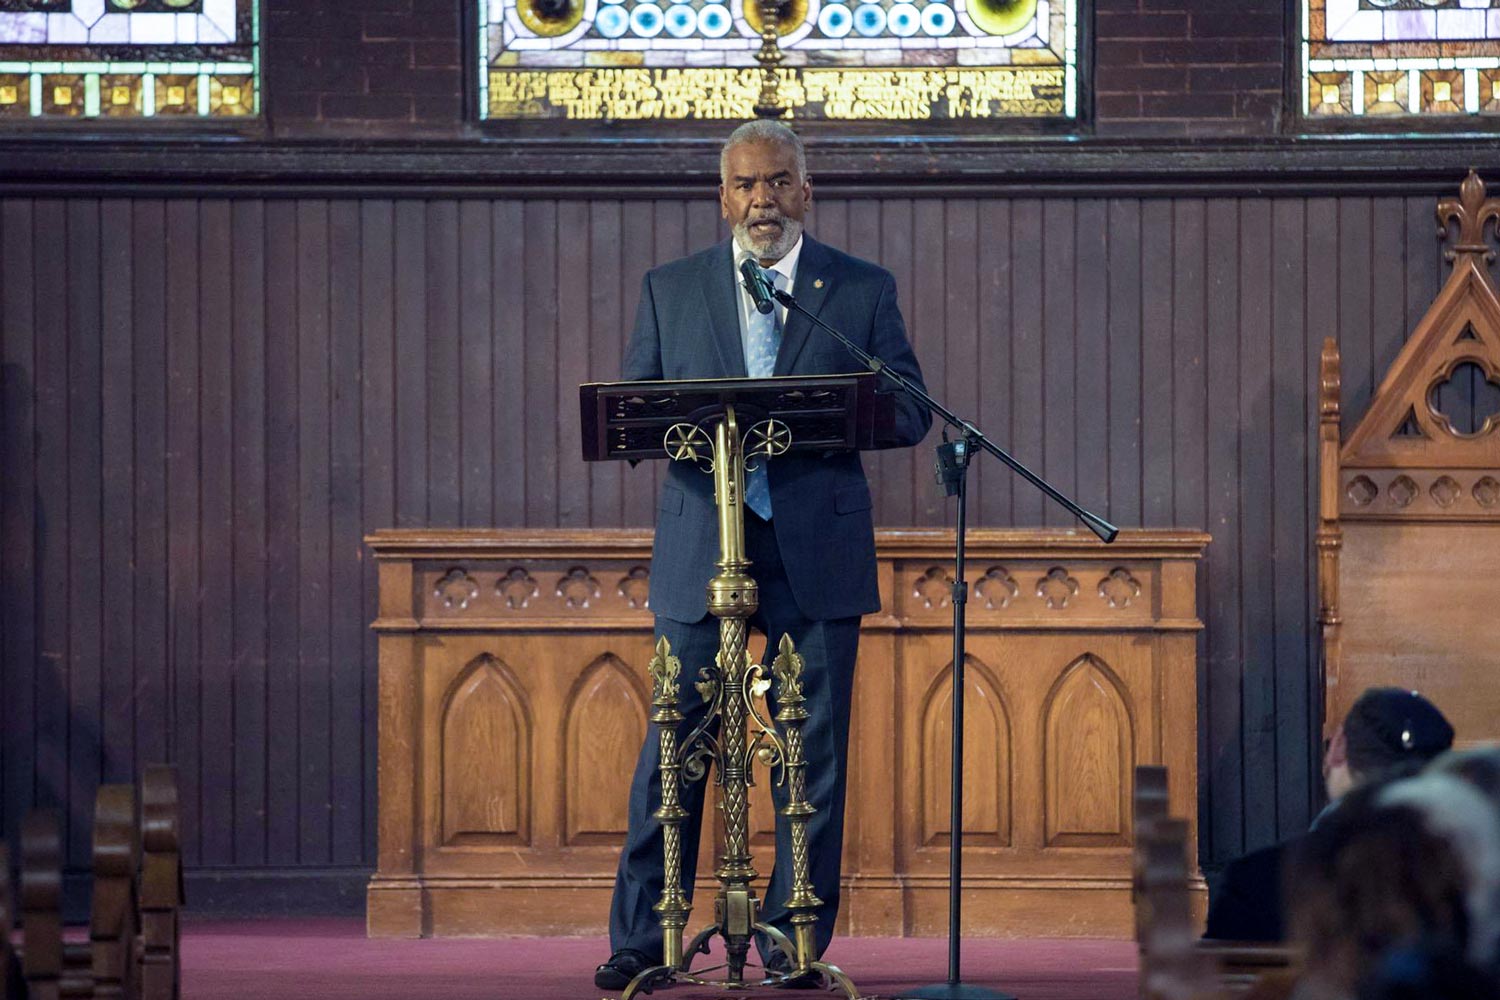 Dr. Marcus Martin speaking at a pulpit